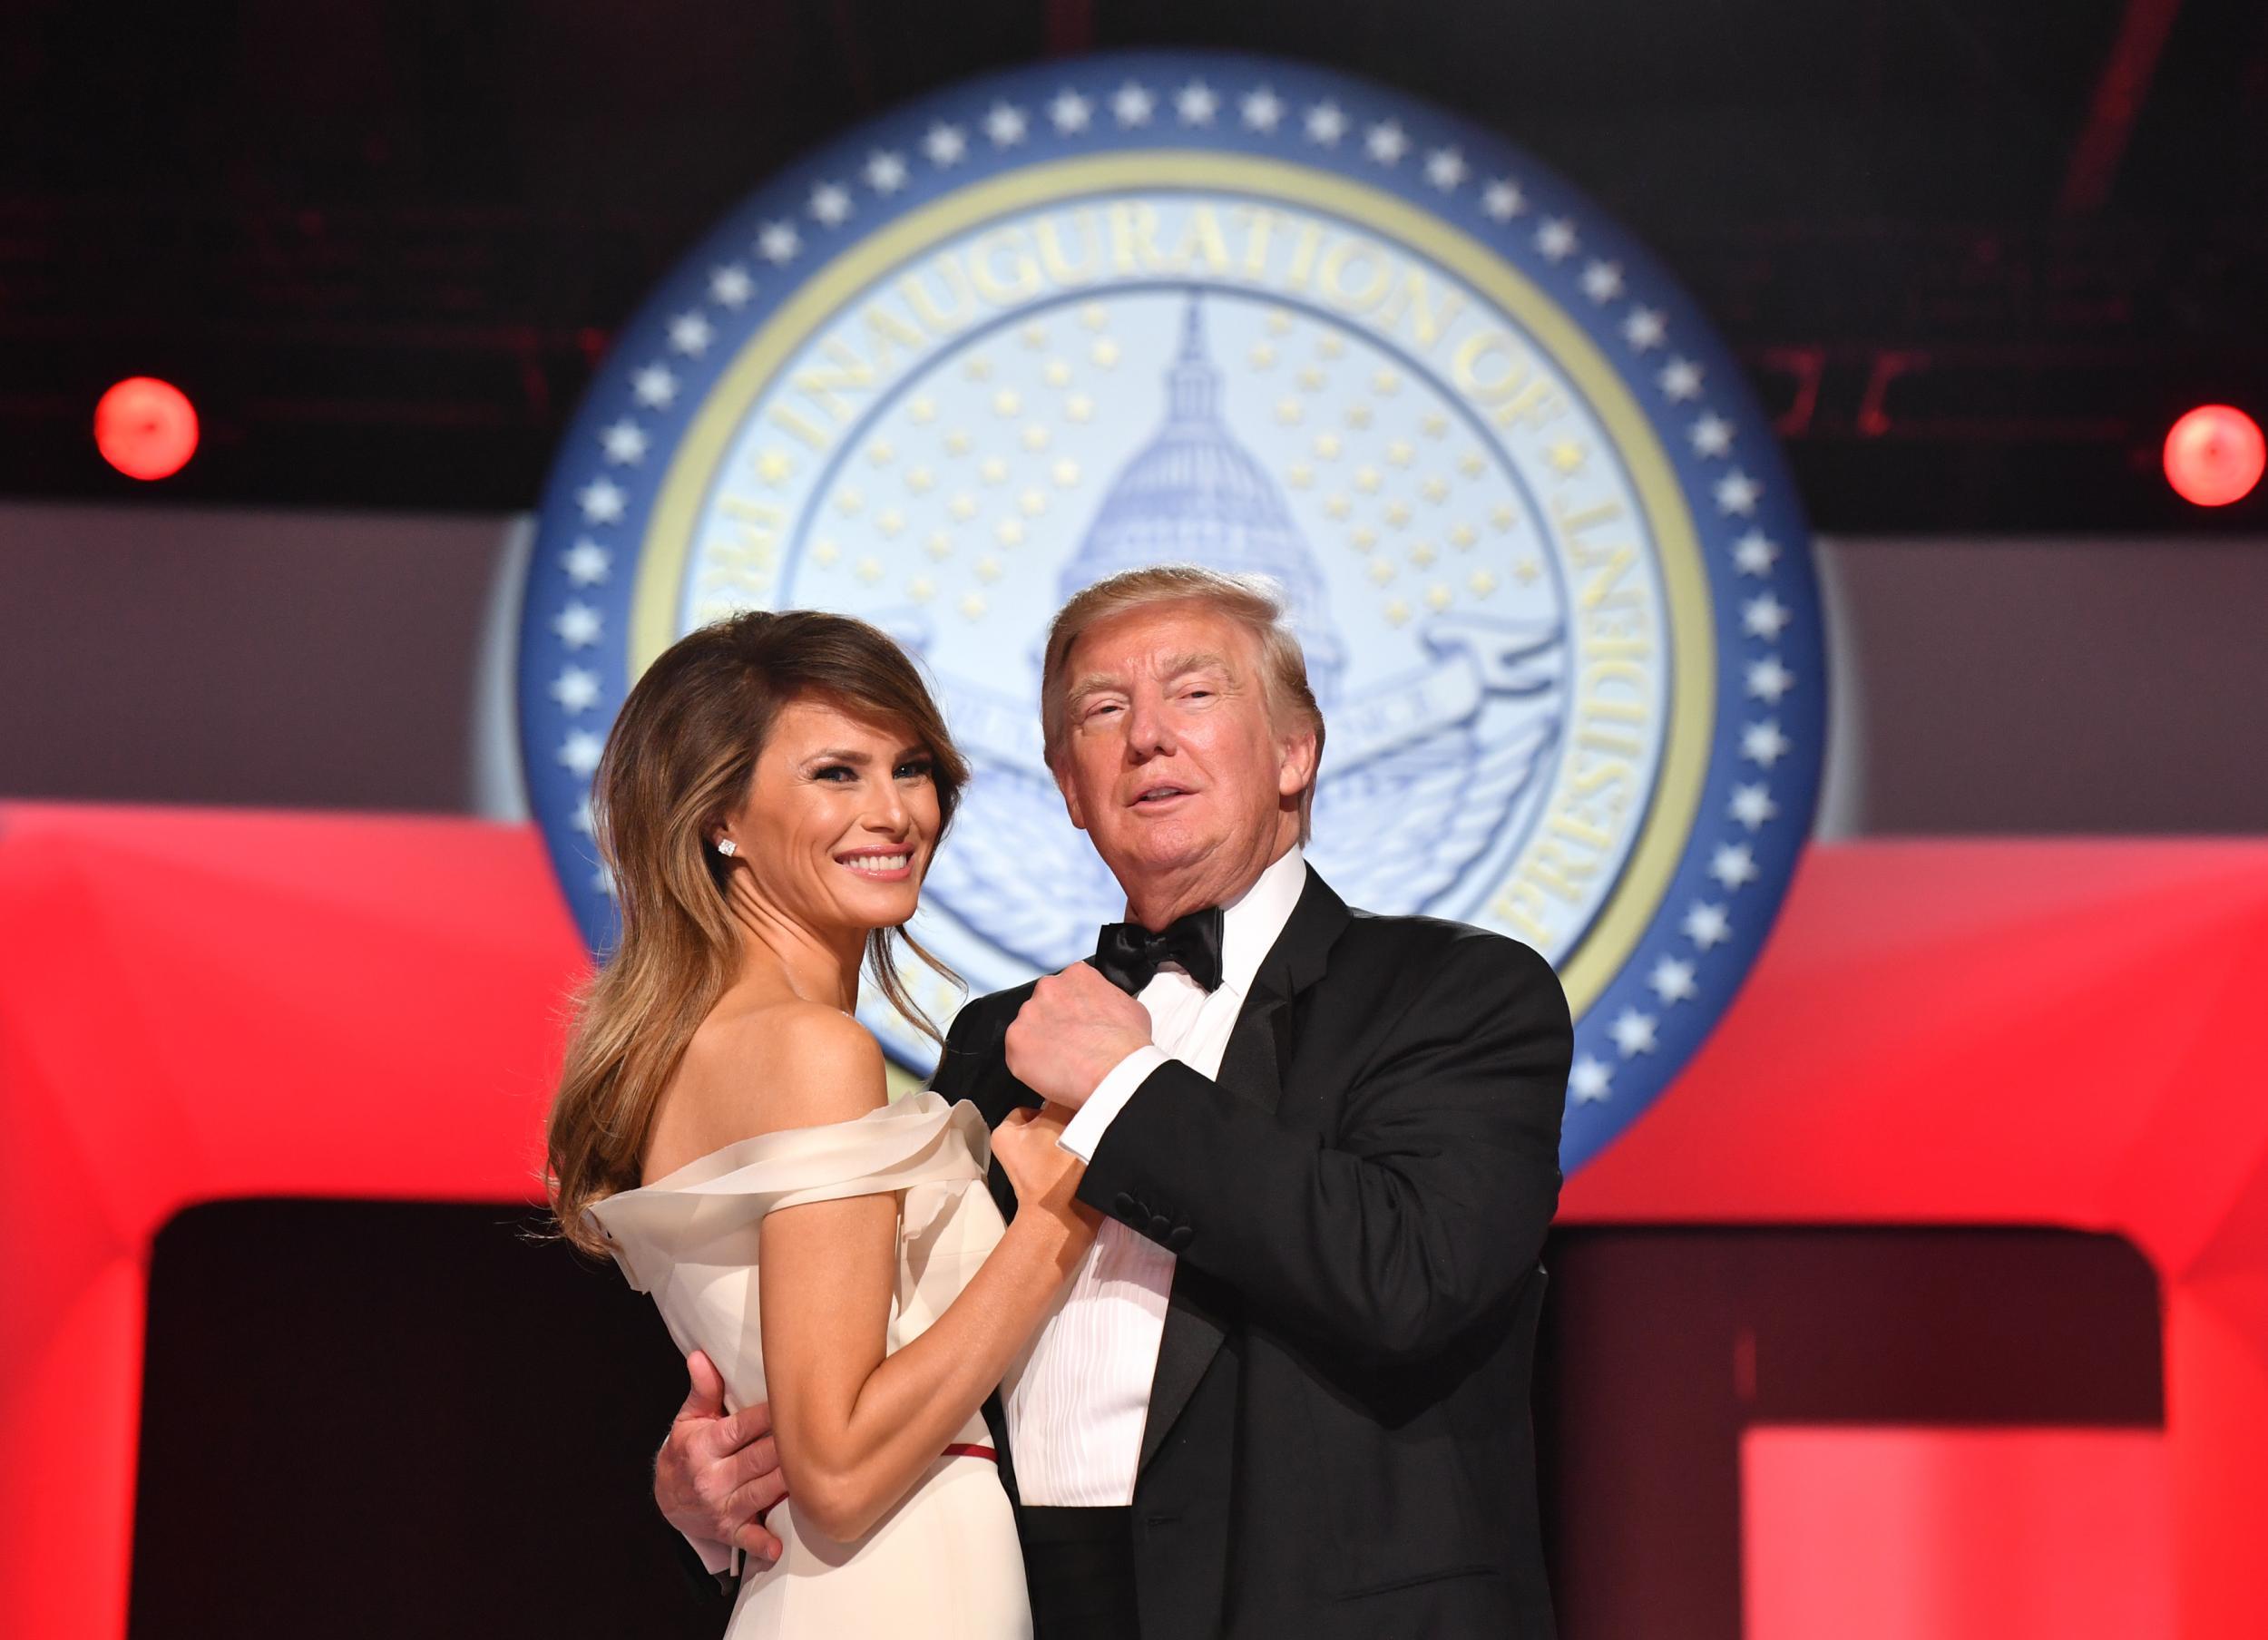 Donald Trump and the first lady, Melania Trump, dance at the Freedom Ball on 20 January 2017